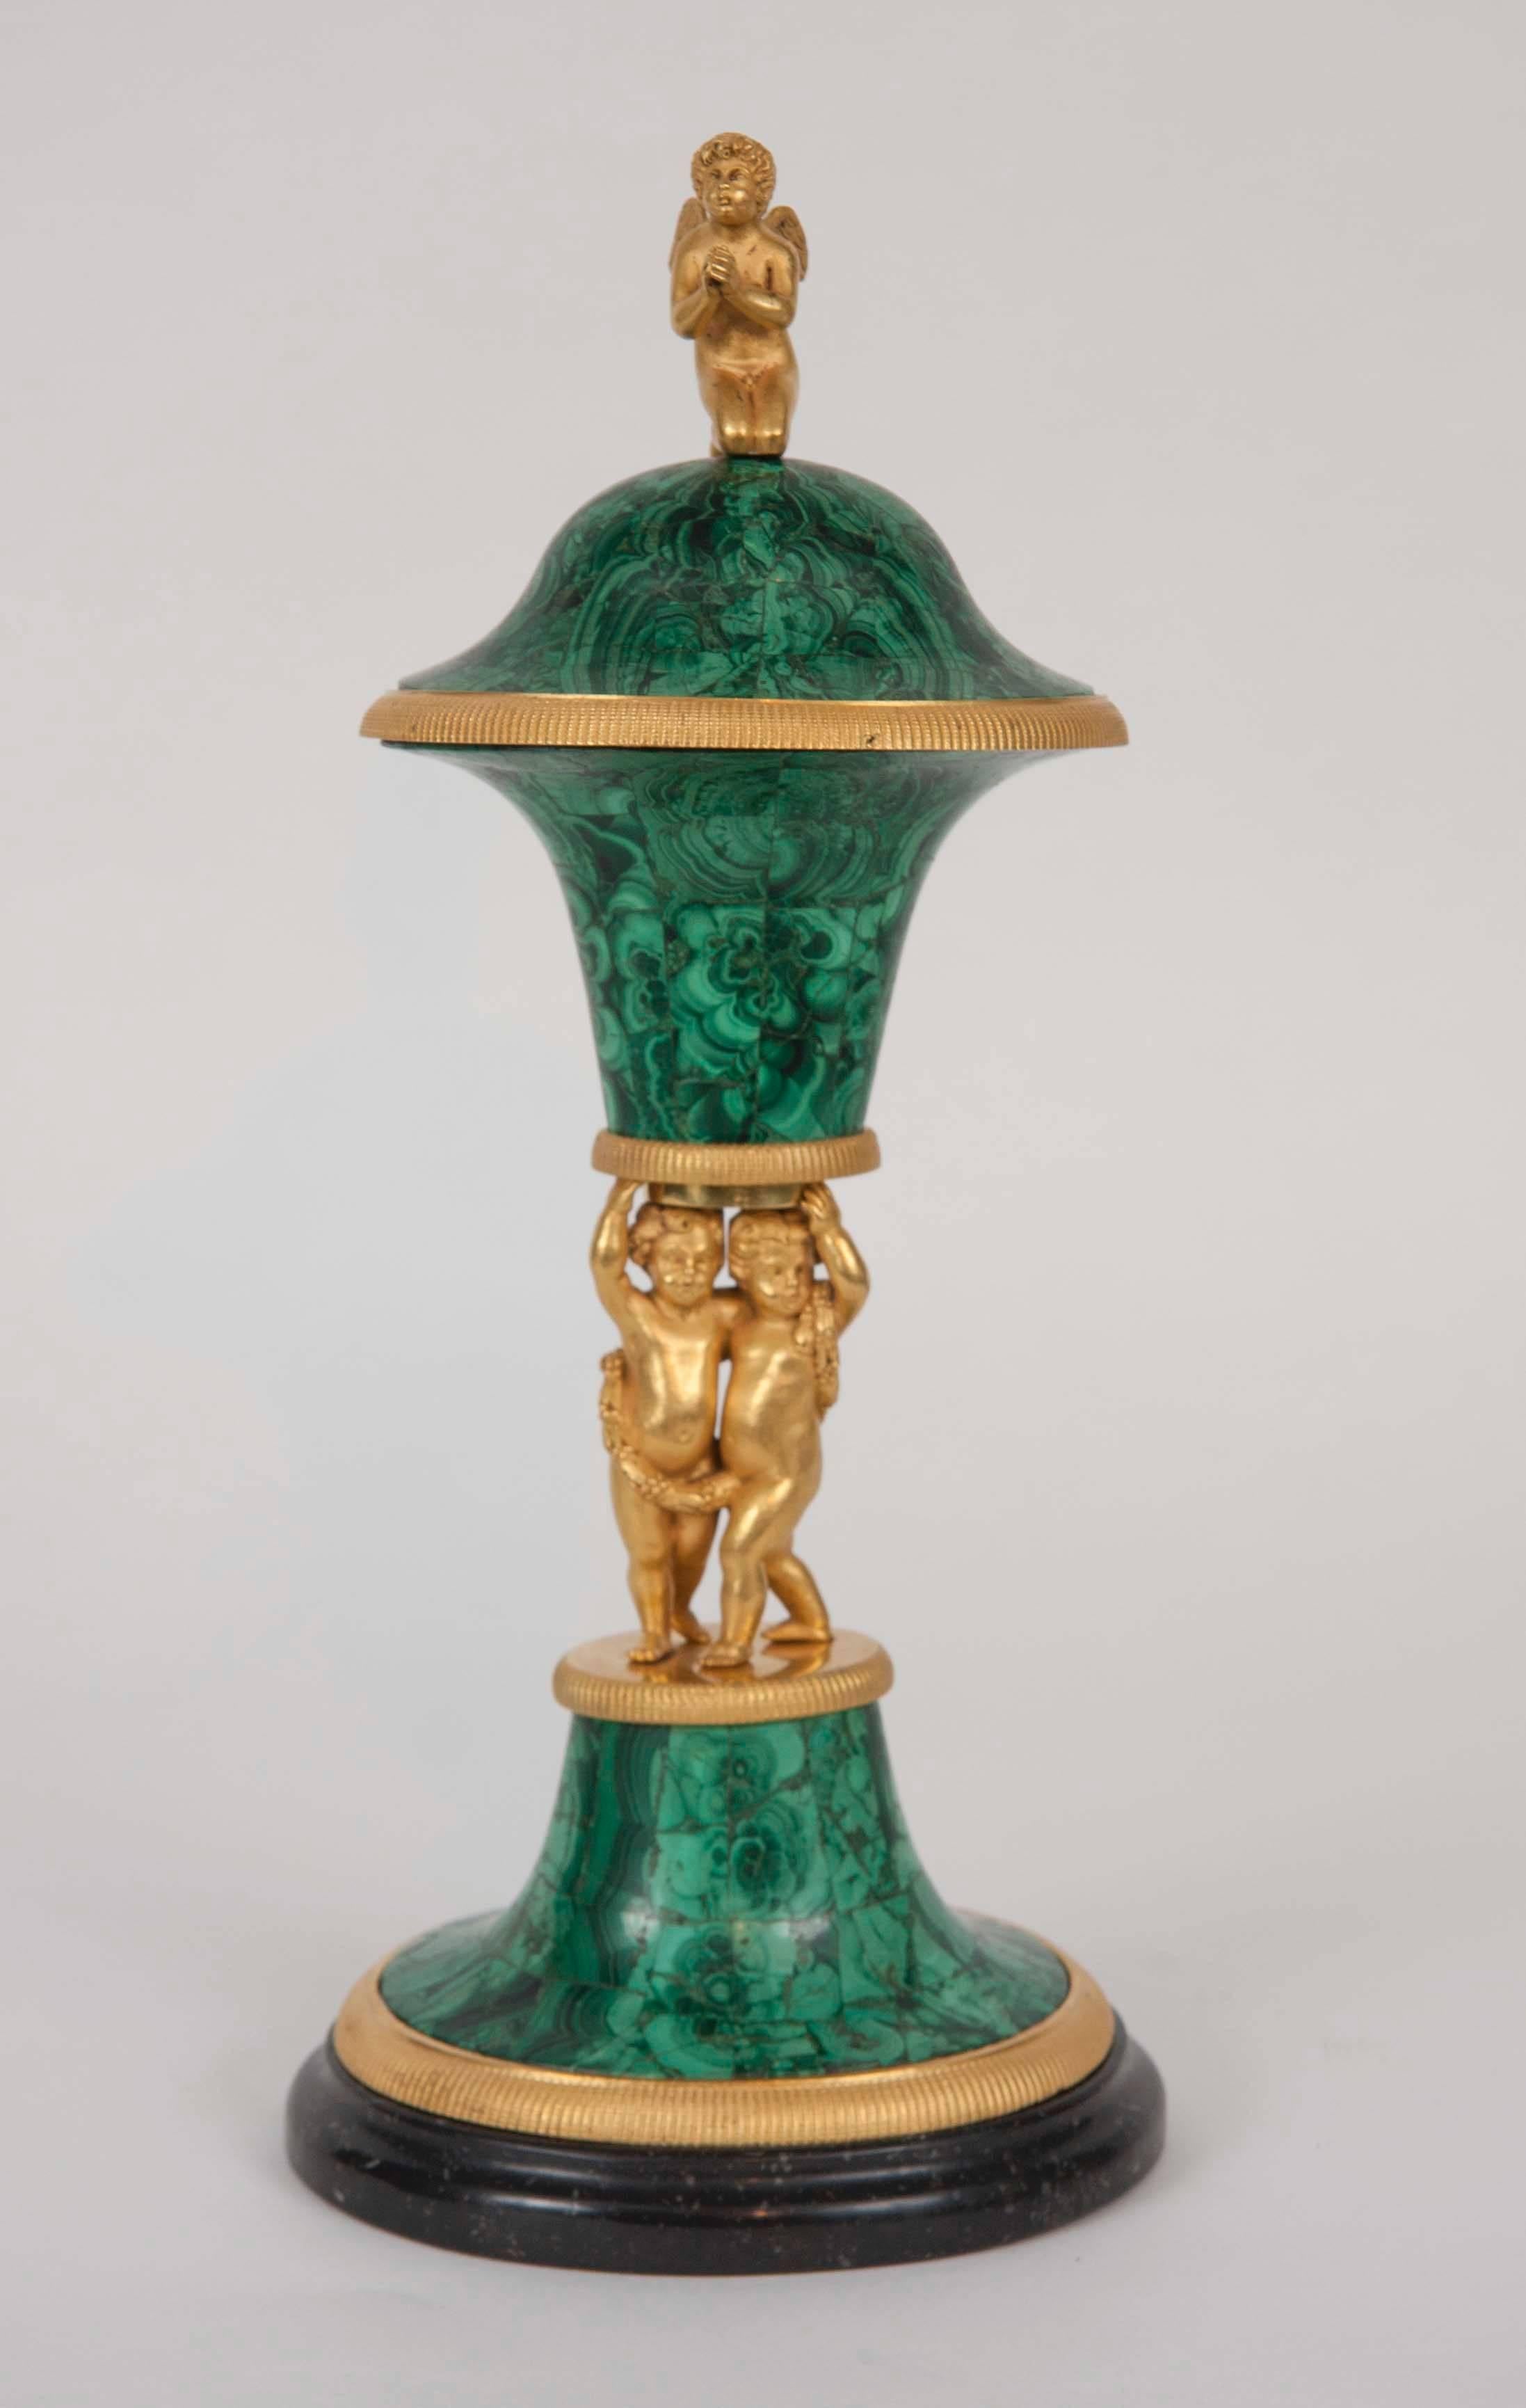 A Russian gilt bronze and malachite covered vase on porphyry base.
Form of winged cupids supporting a malachite vase.
Russia, circa 1800.
Height 14 in.

A similar piece sold at Sotheby's London (December 7, 2010 Important Furniture, Silver &